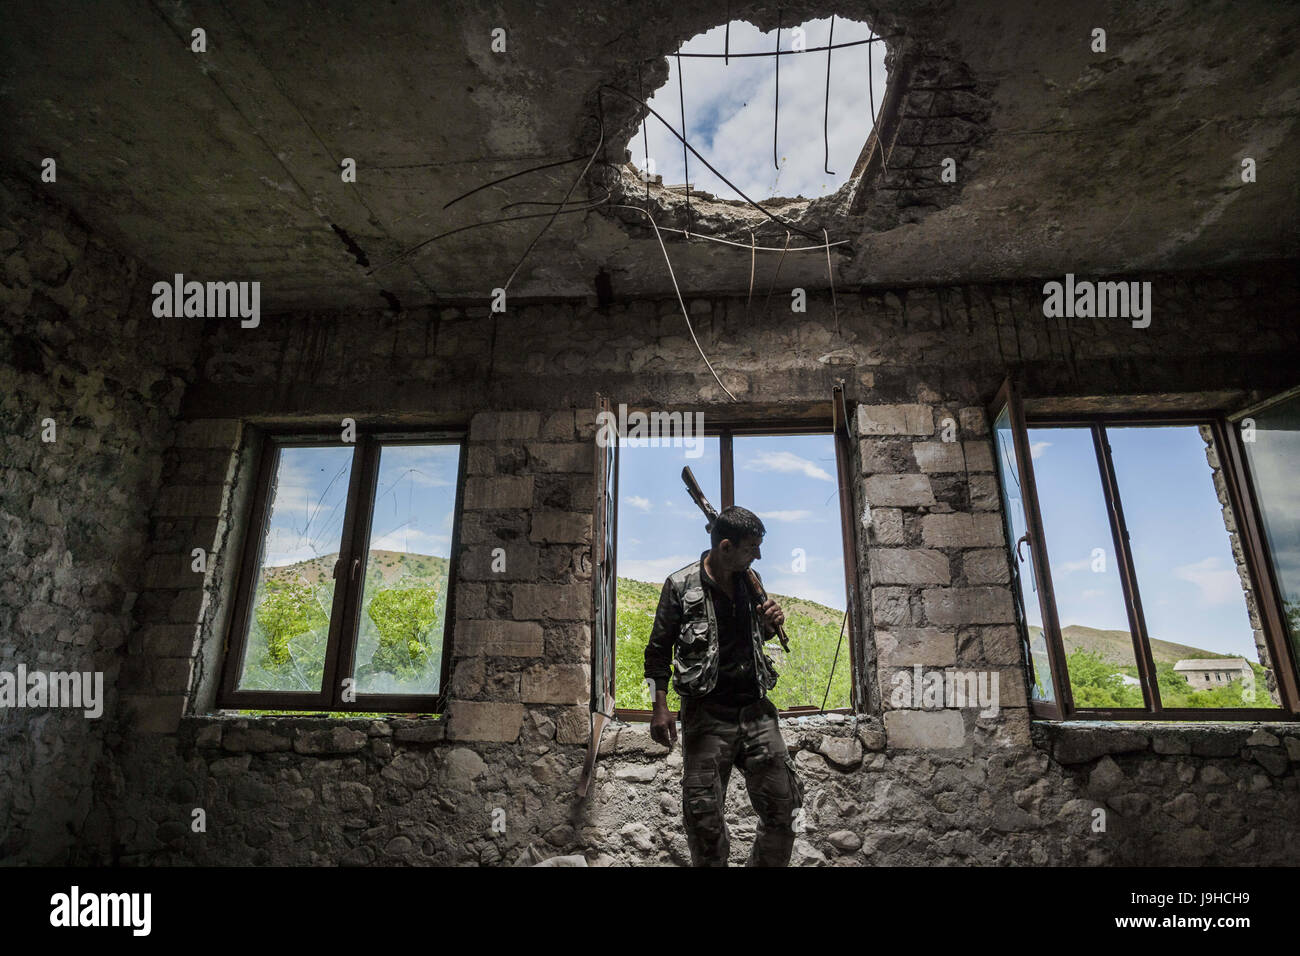 Talish, Martakert, Nagorno Karabakh. 2nd June, 2017. Member of the militia of Nagorno Karabakh in the destroyed school of Talish village, shelled with artillery by the Azerbaijan army one year ago. Credit: Celestino Arce/ZUMA Wire/Alamy Live News Stock Photo